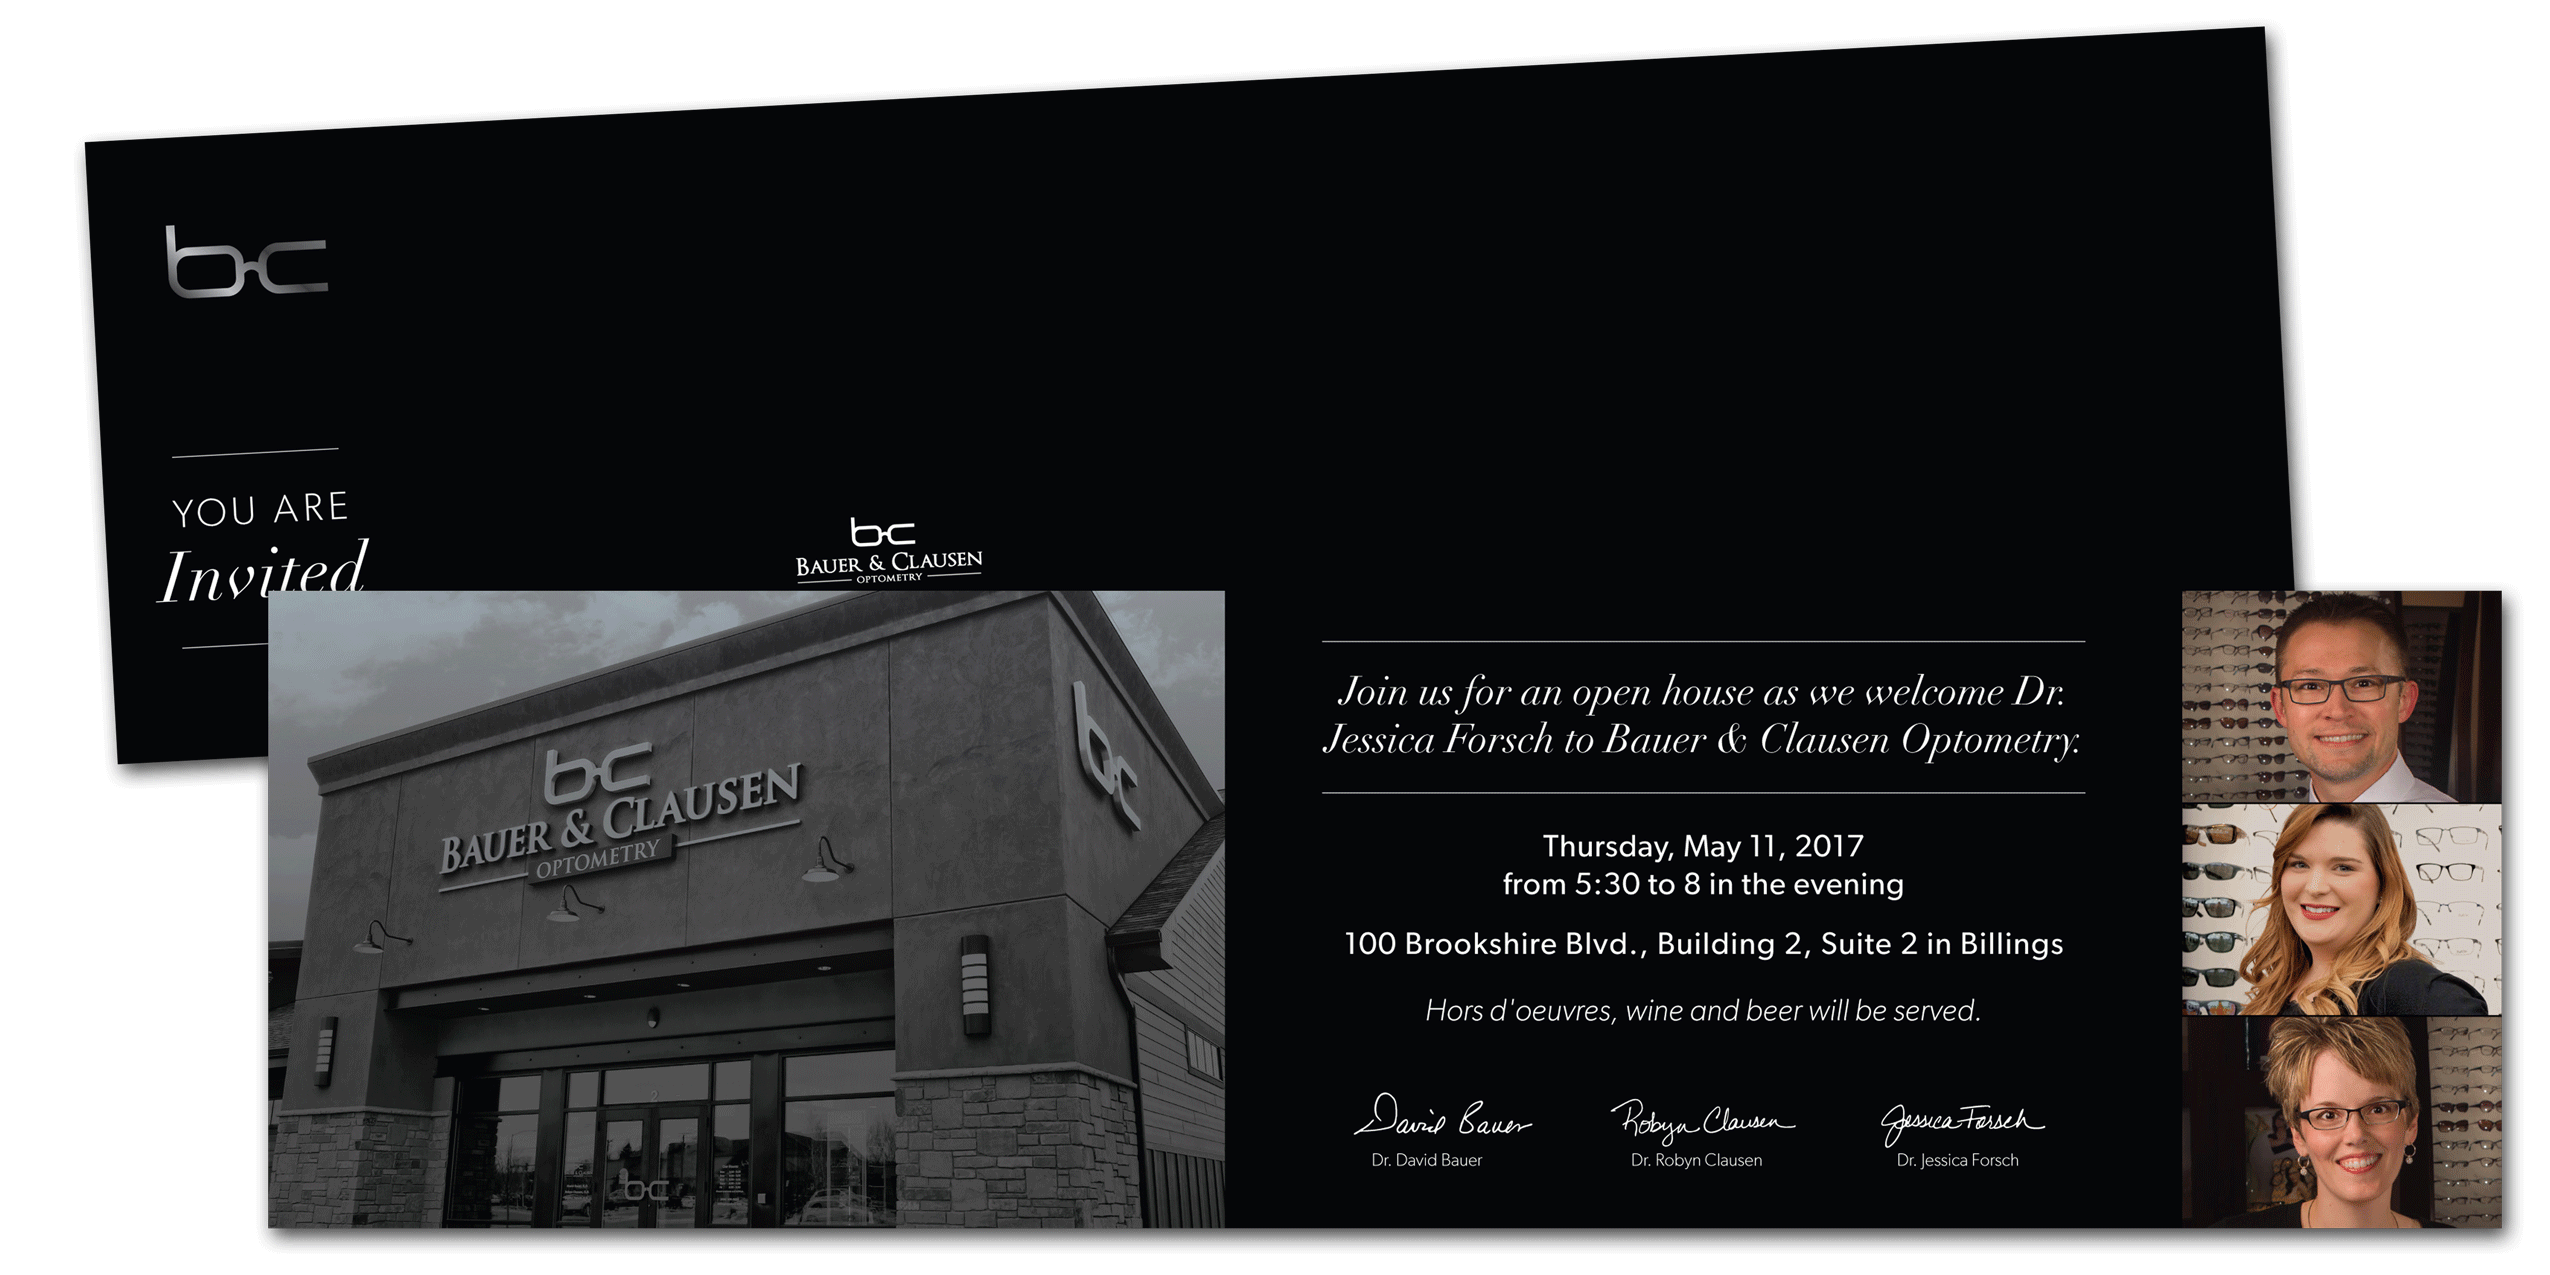 Gate-folded VIP open house invitation for Bauer & Clausen Optometry, Billings, MT